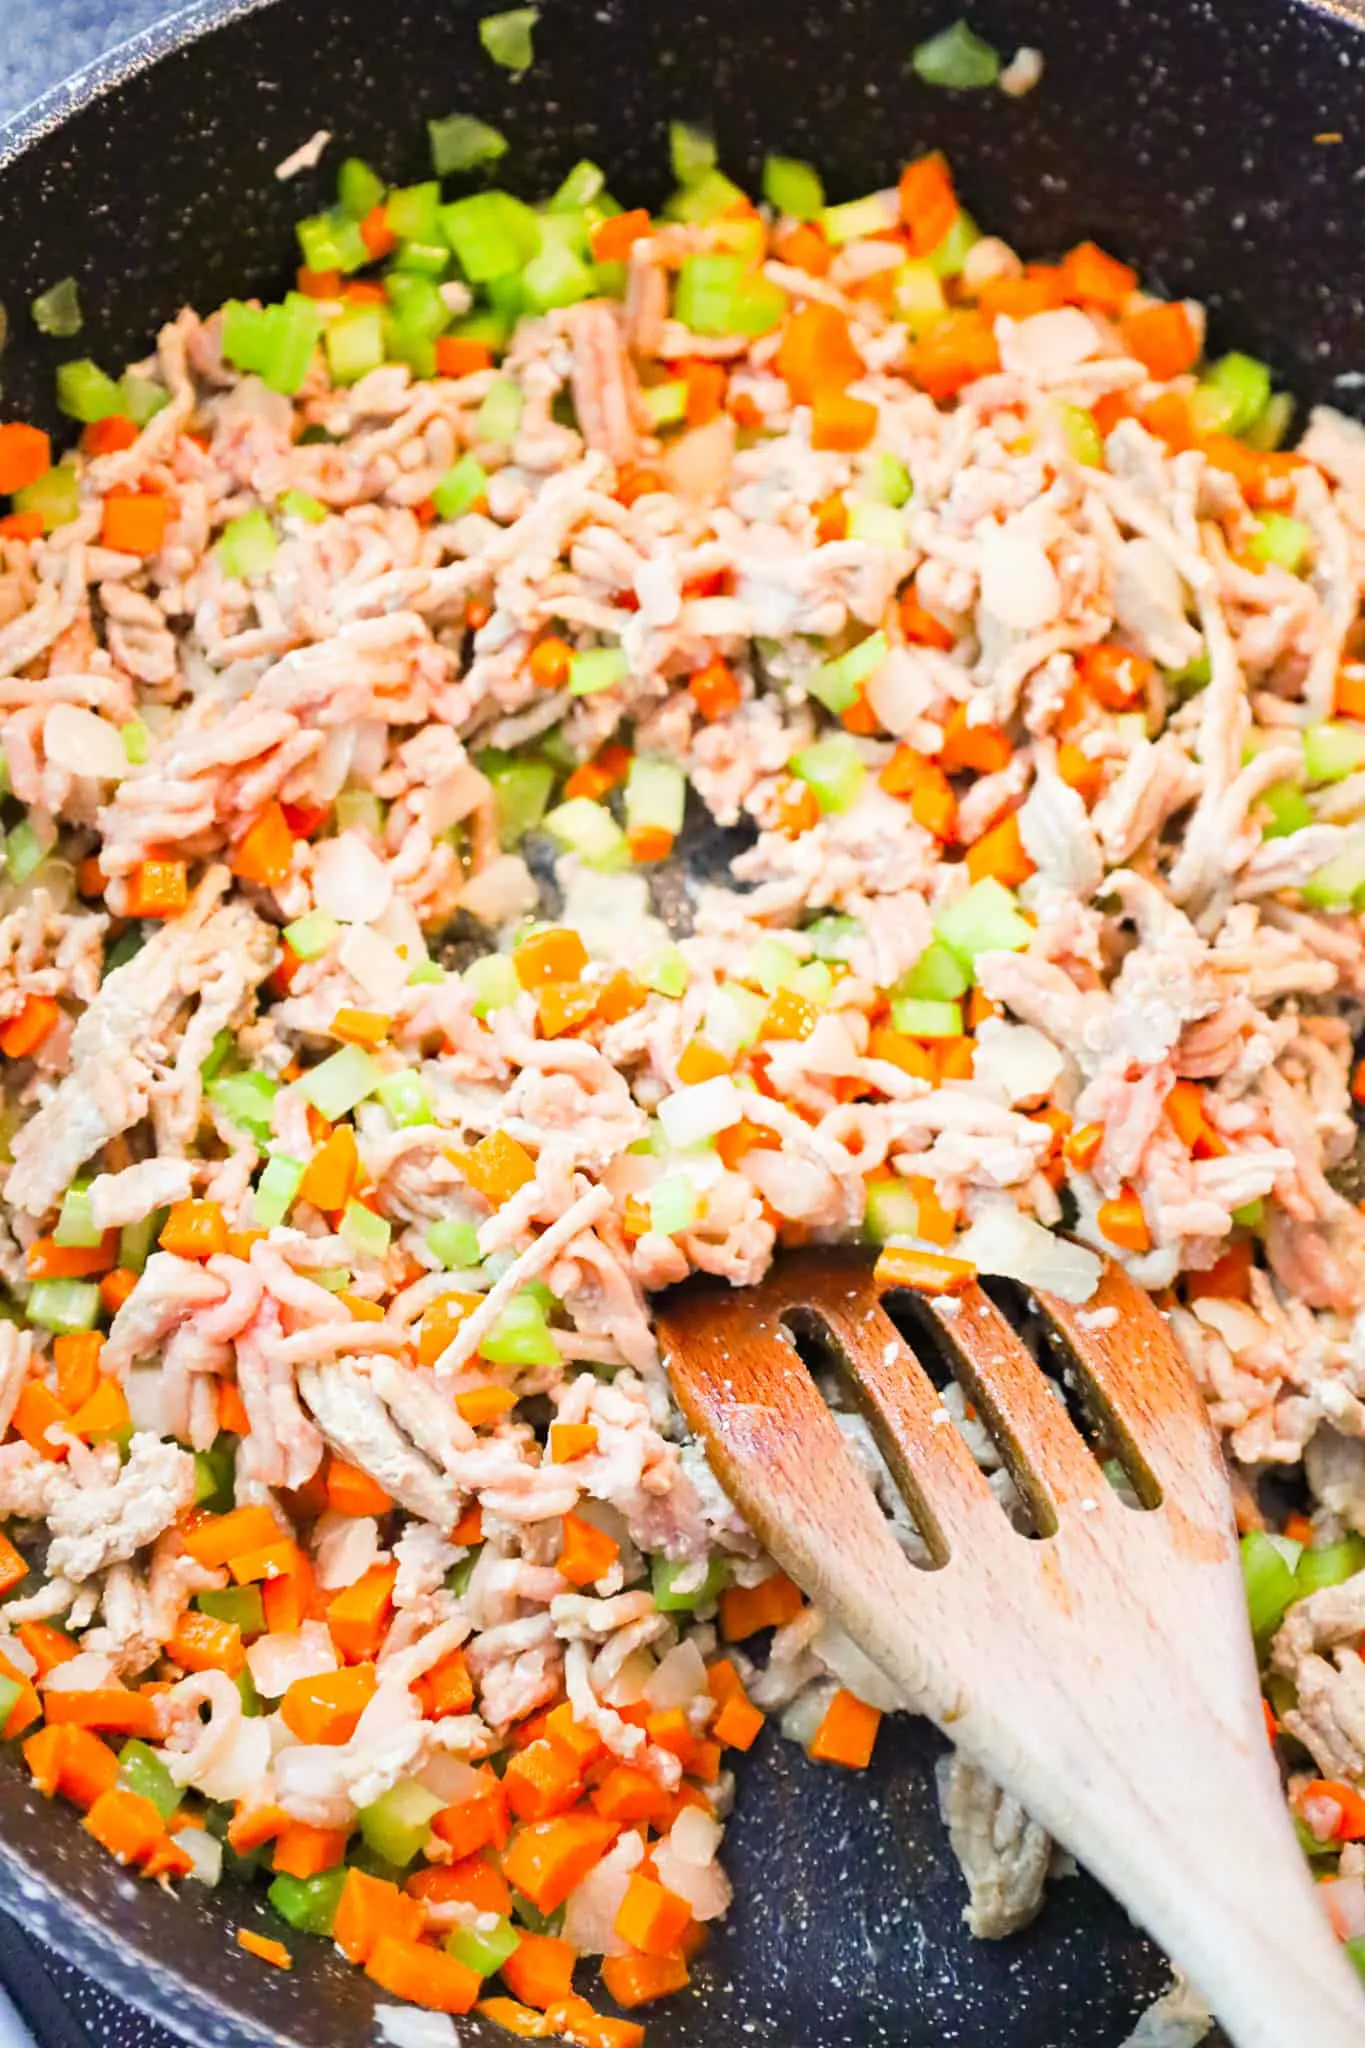 ground turkey and diced veggies cooking in a skillet